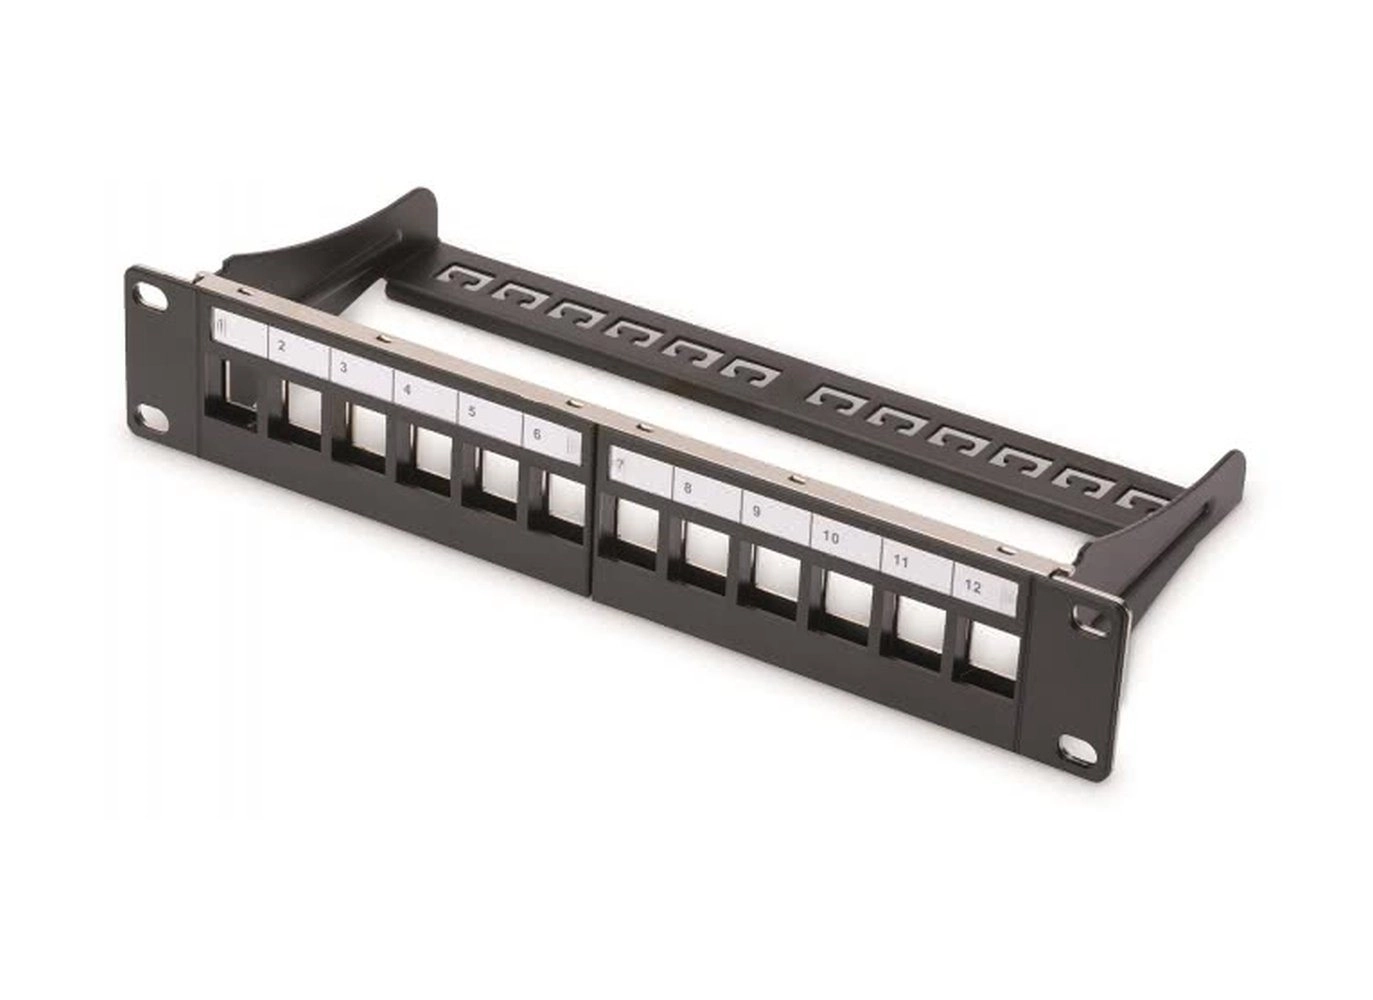 DN-91420, Patchpanel